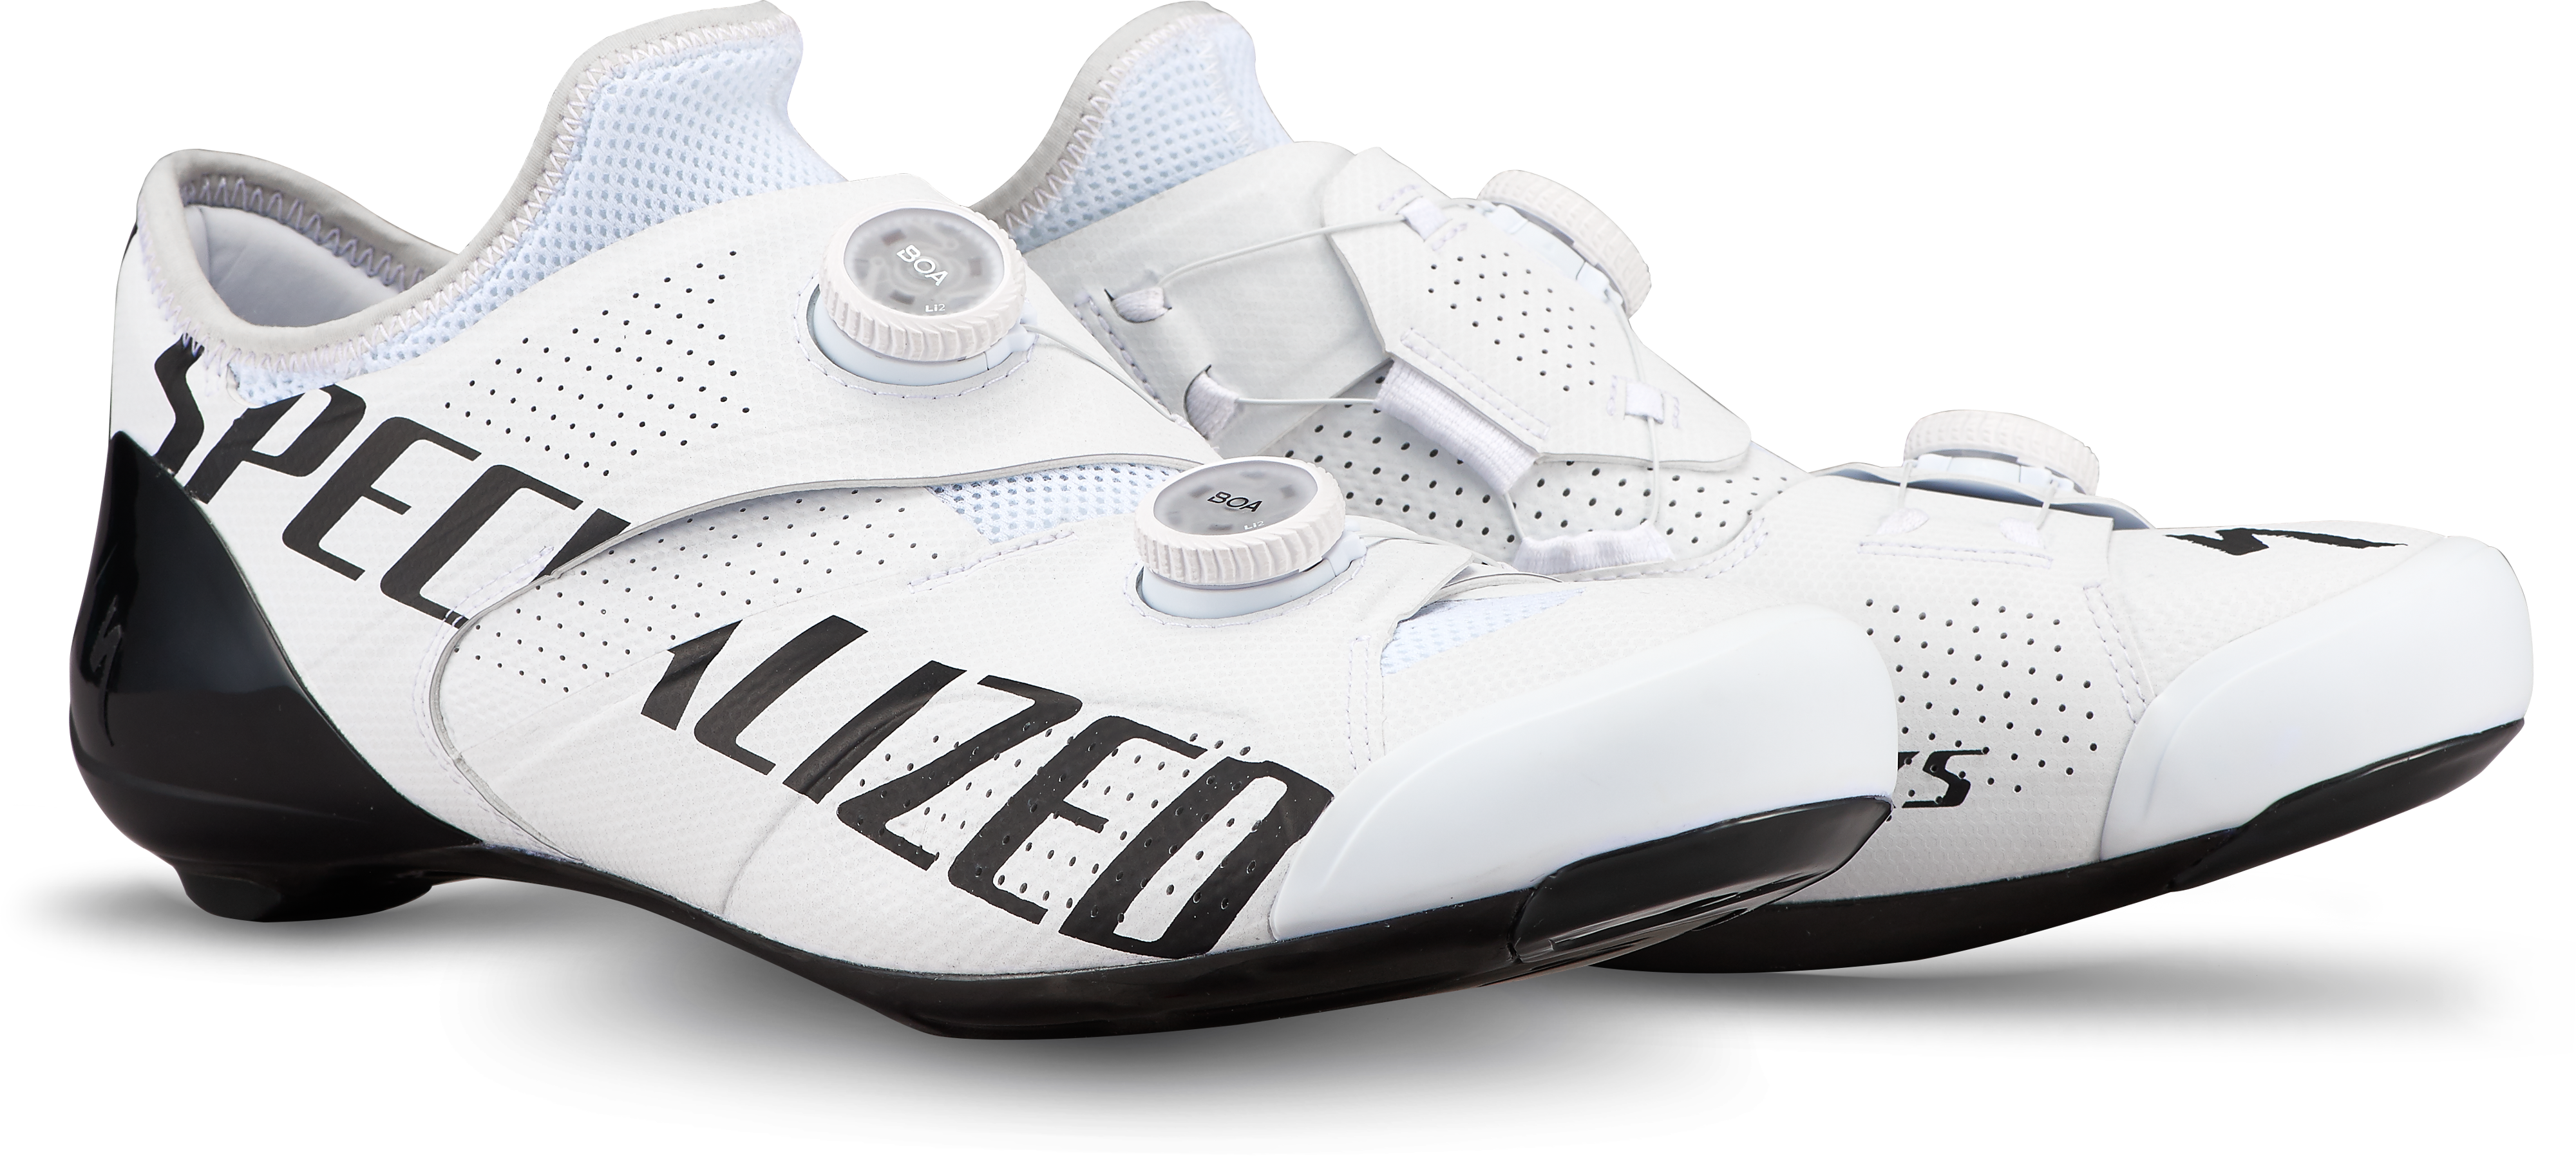 S-WORKS ARES ROAD SHOES TEAM WHT 42.5(42.5 (27.3cm) TEAMホワイト